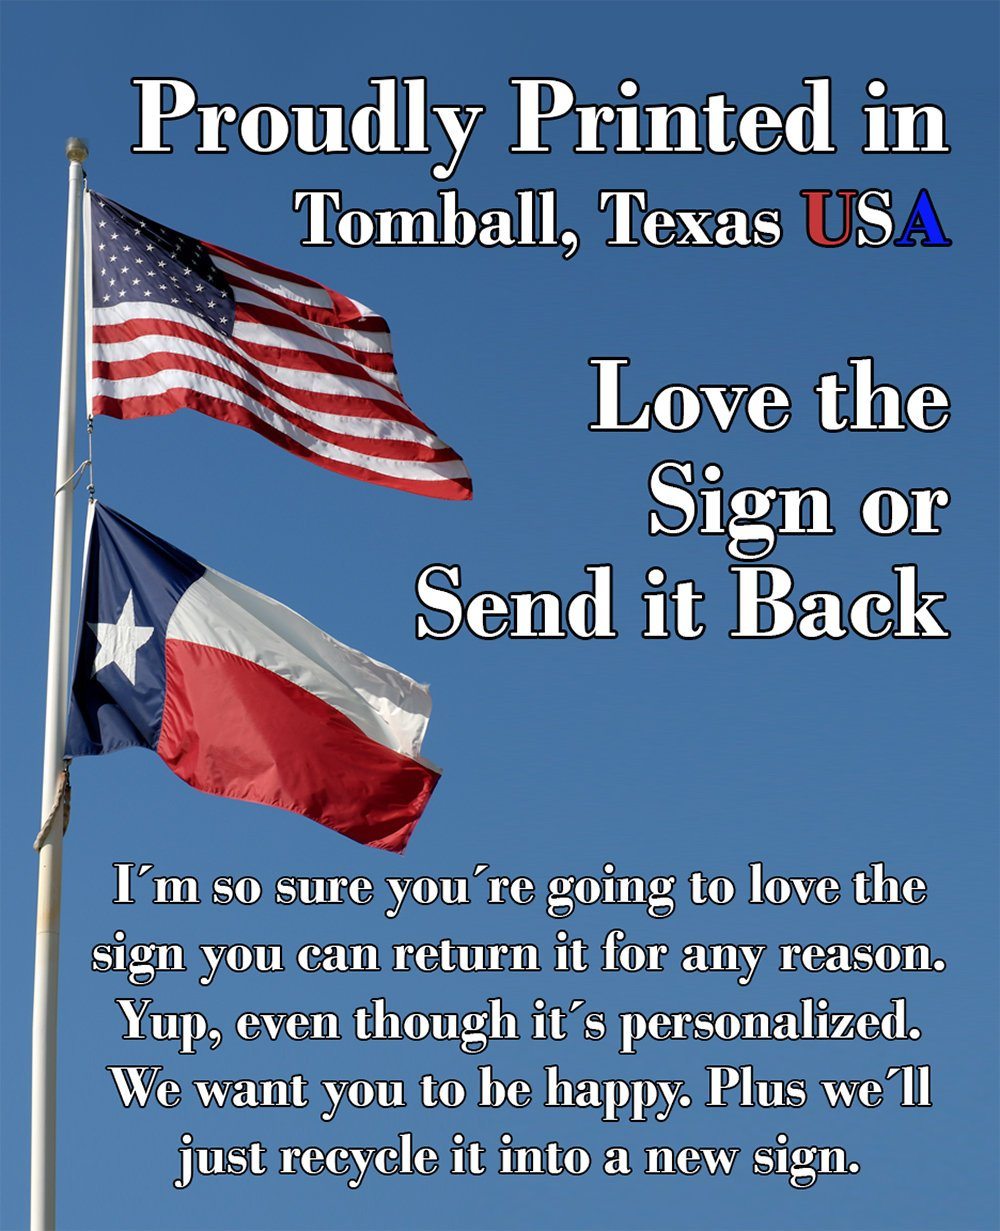 Personalized - It's a (Your Name) Thing - Metal Sign | Lone Star Art.